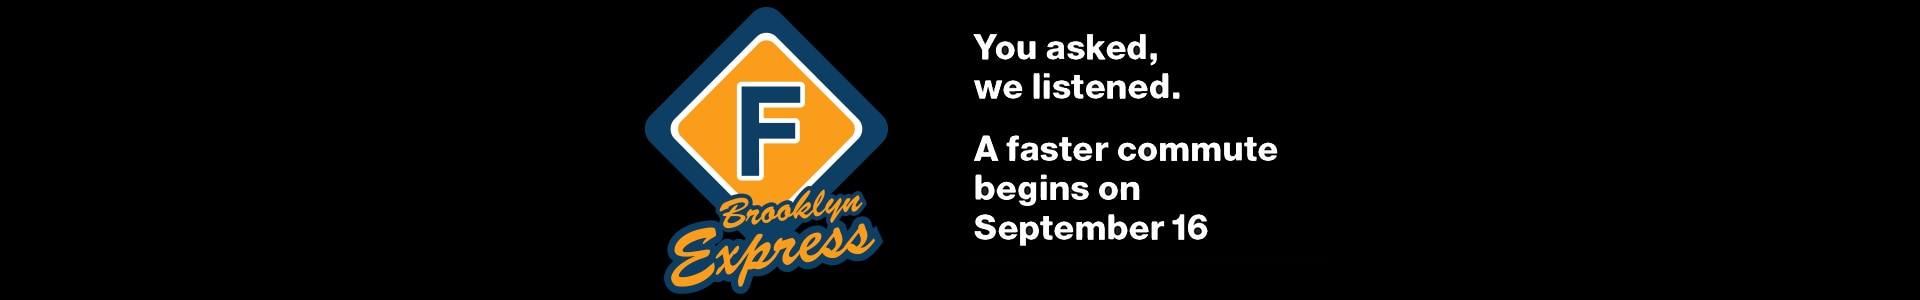 You asked. We listened. A faster commute begins on September 16, 2019. F Brooklyn Express.